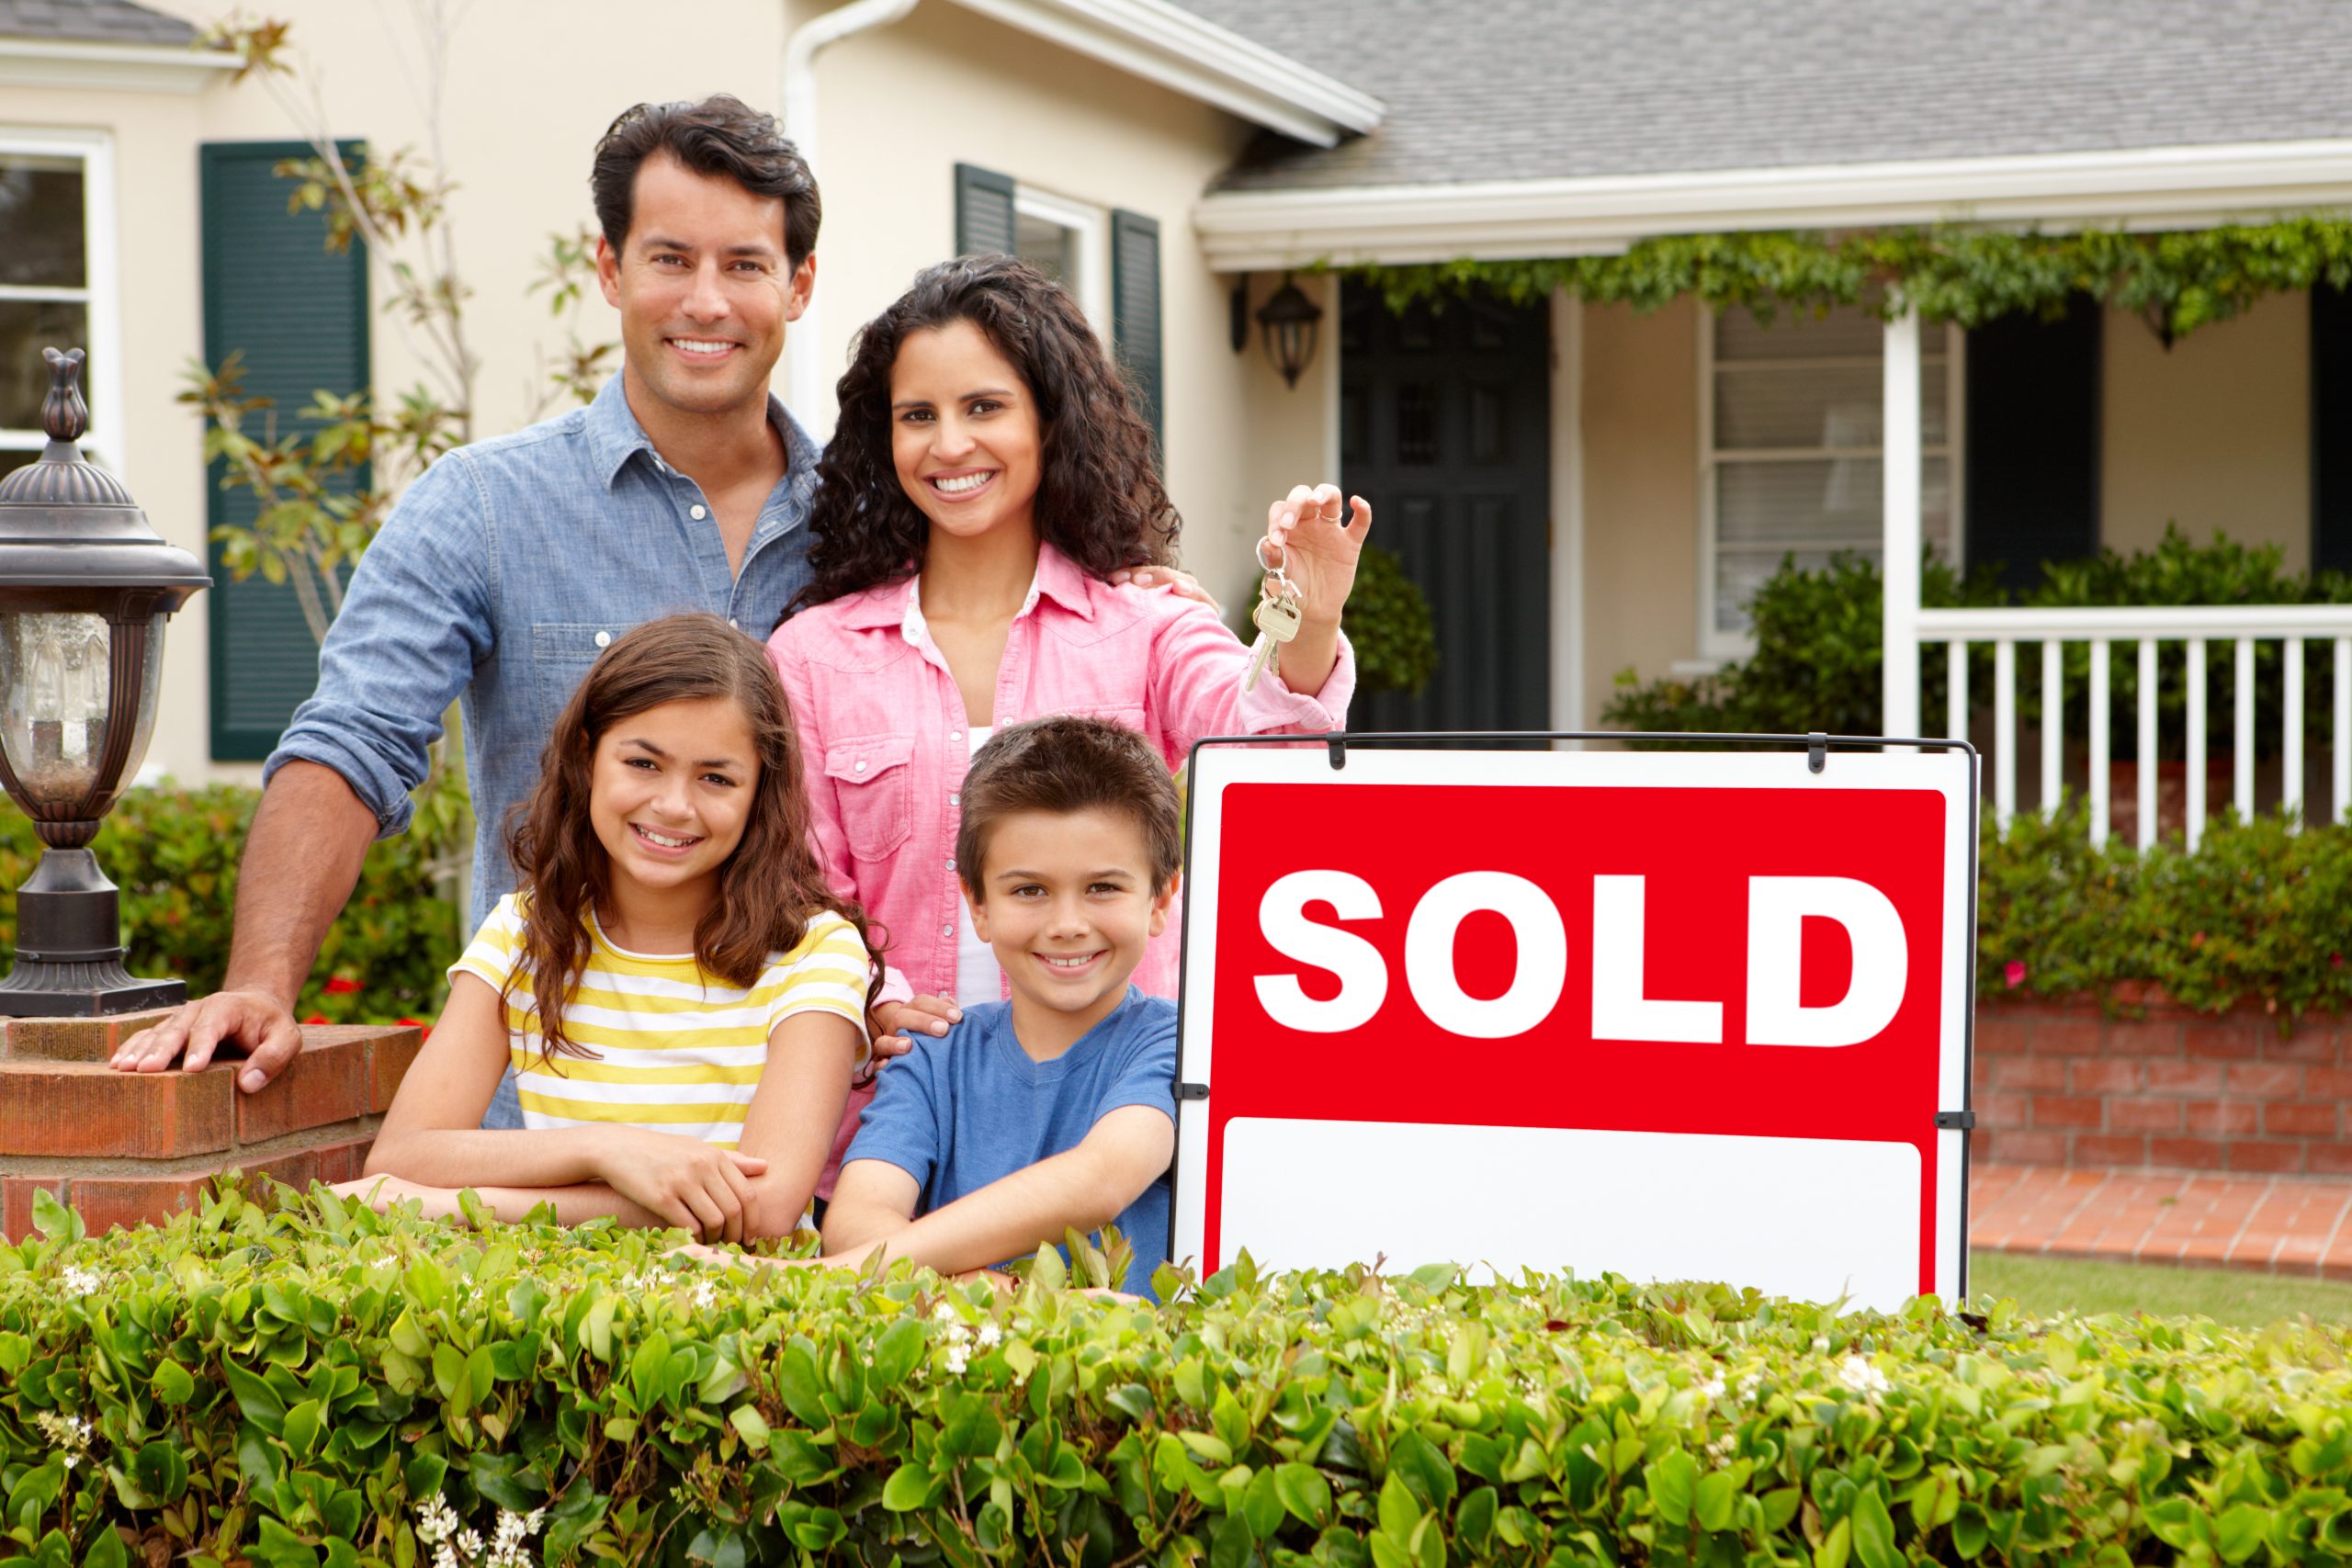 Dad, mom, daughter and son outside home next to red sold sign